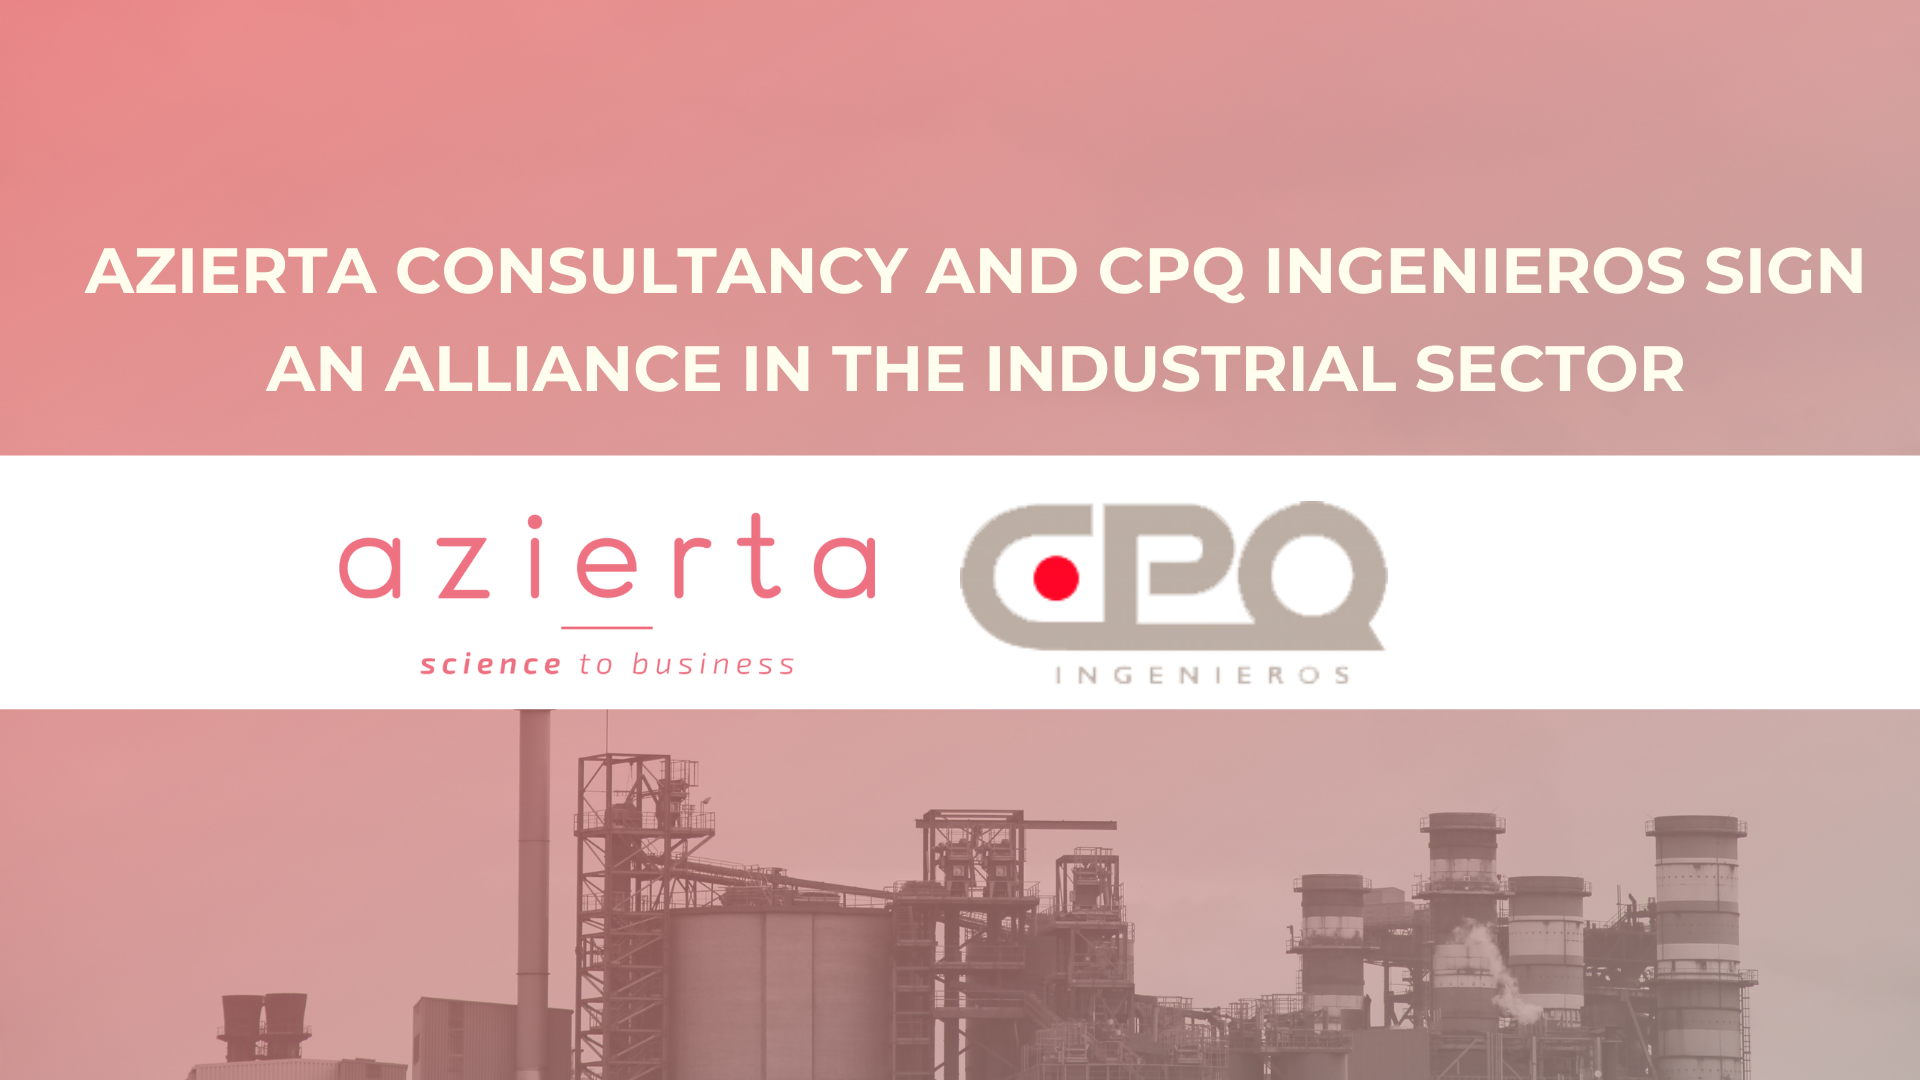 AZIERTA CONSULTANCY and CPQ INGENIEROS sign an alliance in the industrial sector